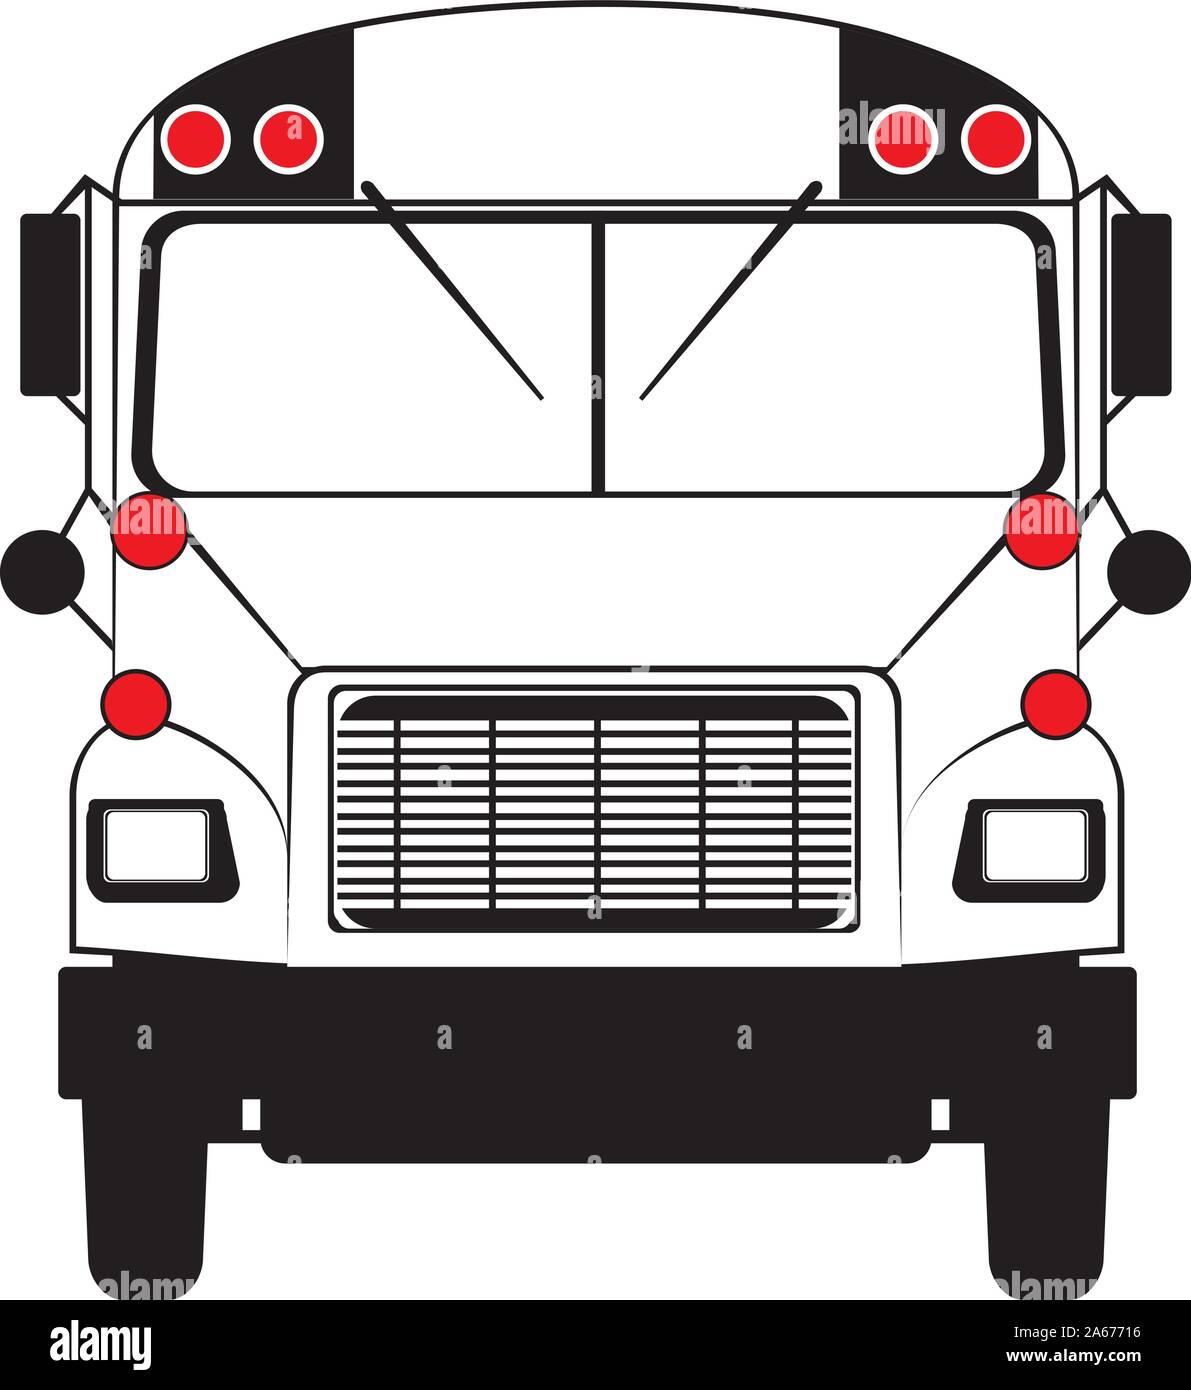 Simple Bus coloring page | Free Printable Coloring Pages